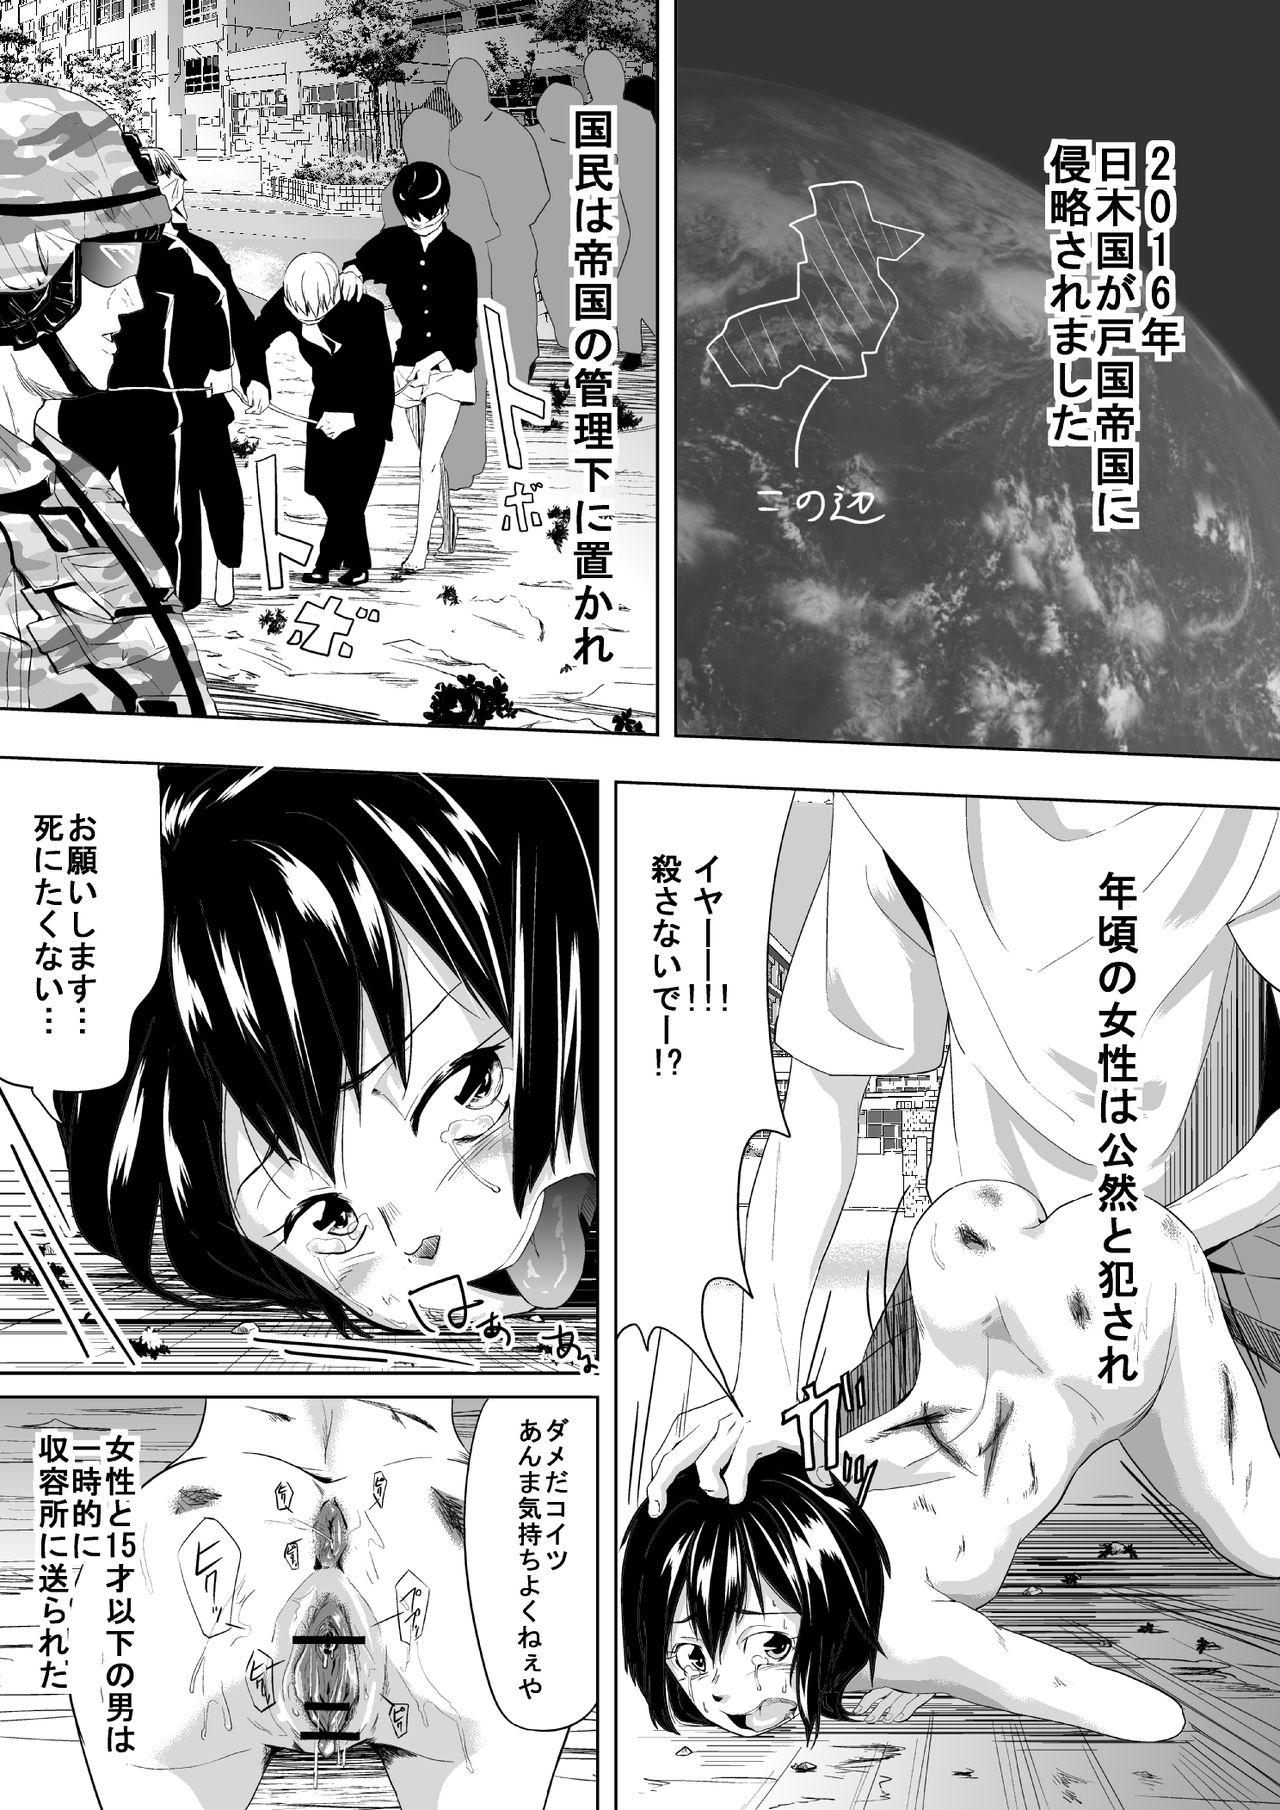 Culona こんな世界は嫌だ Blowing - Page 6